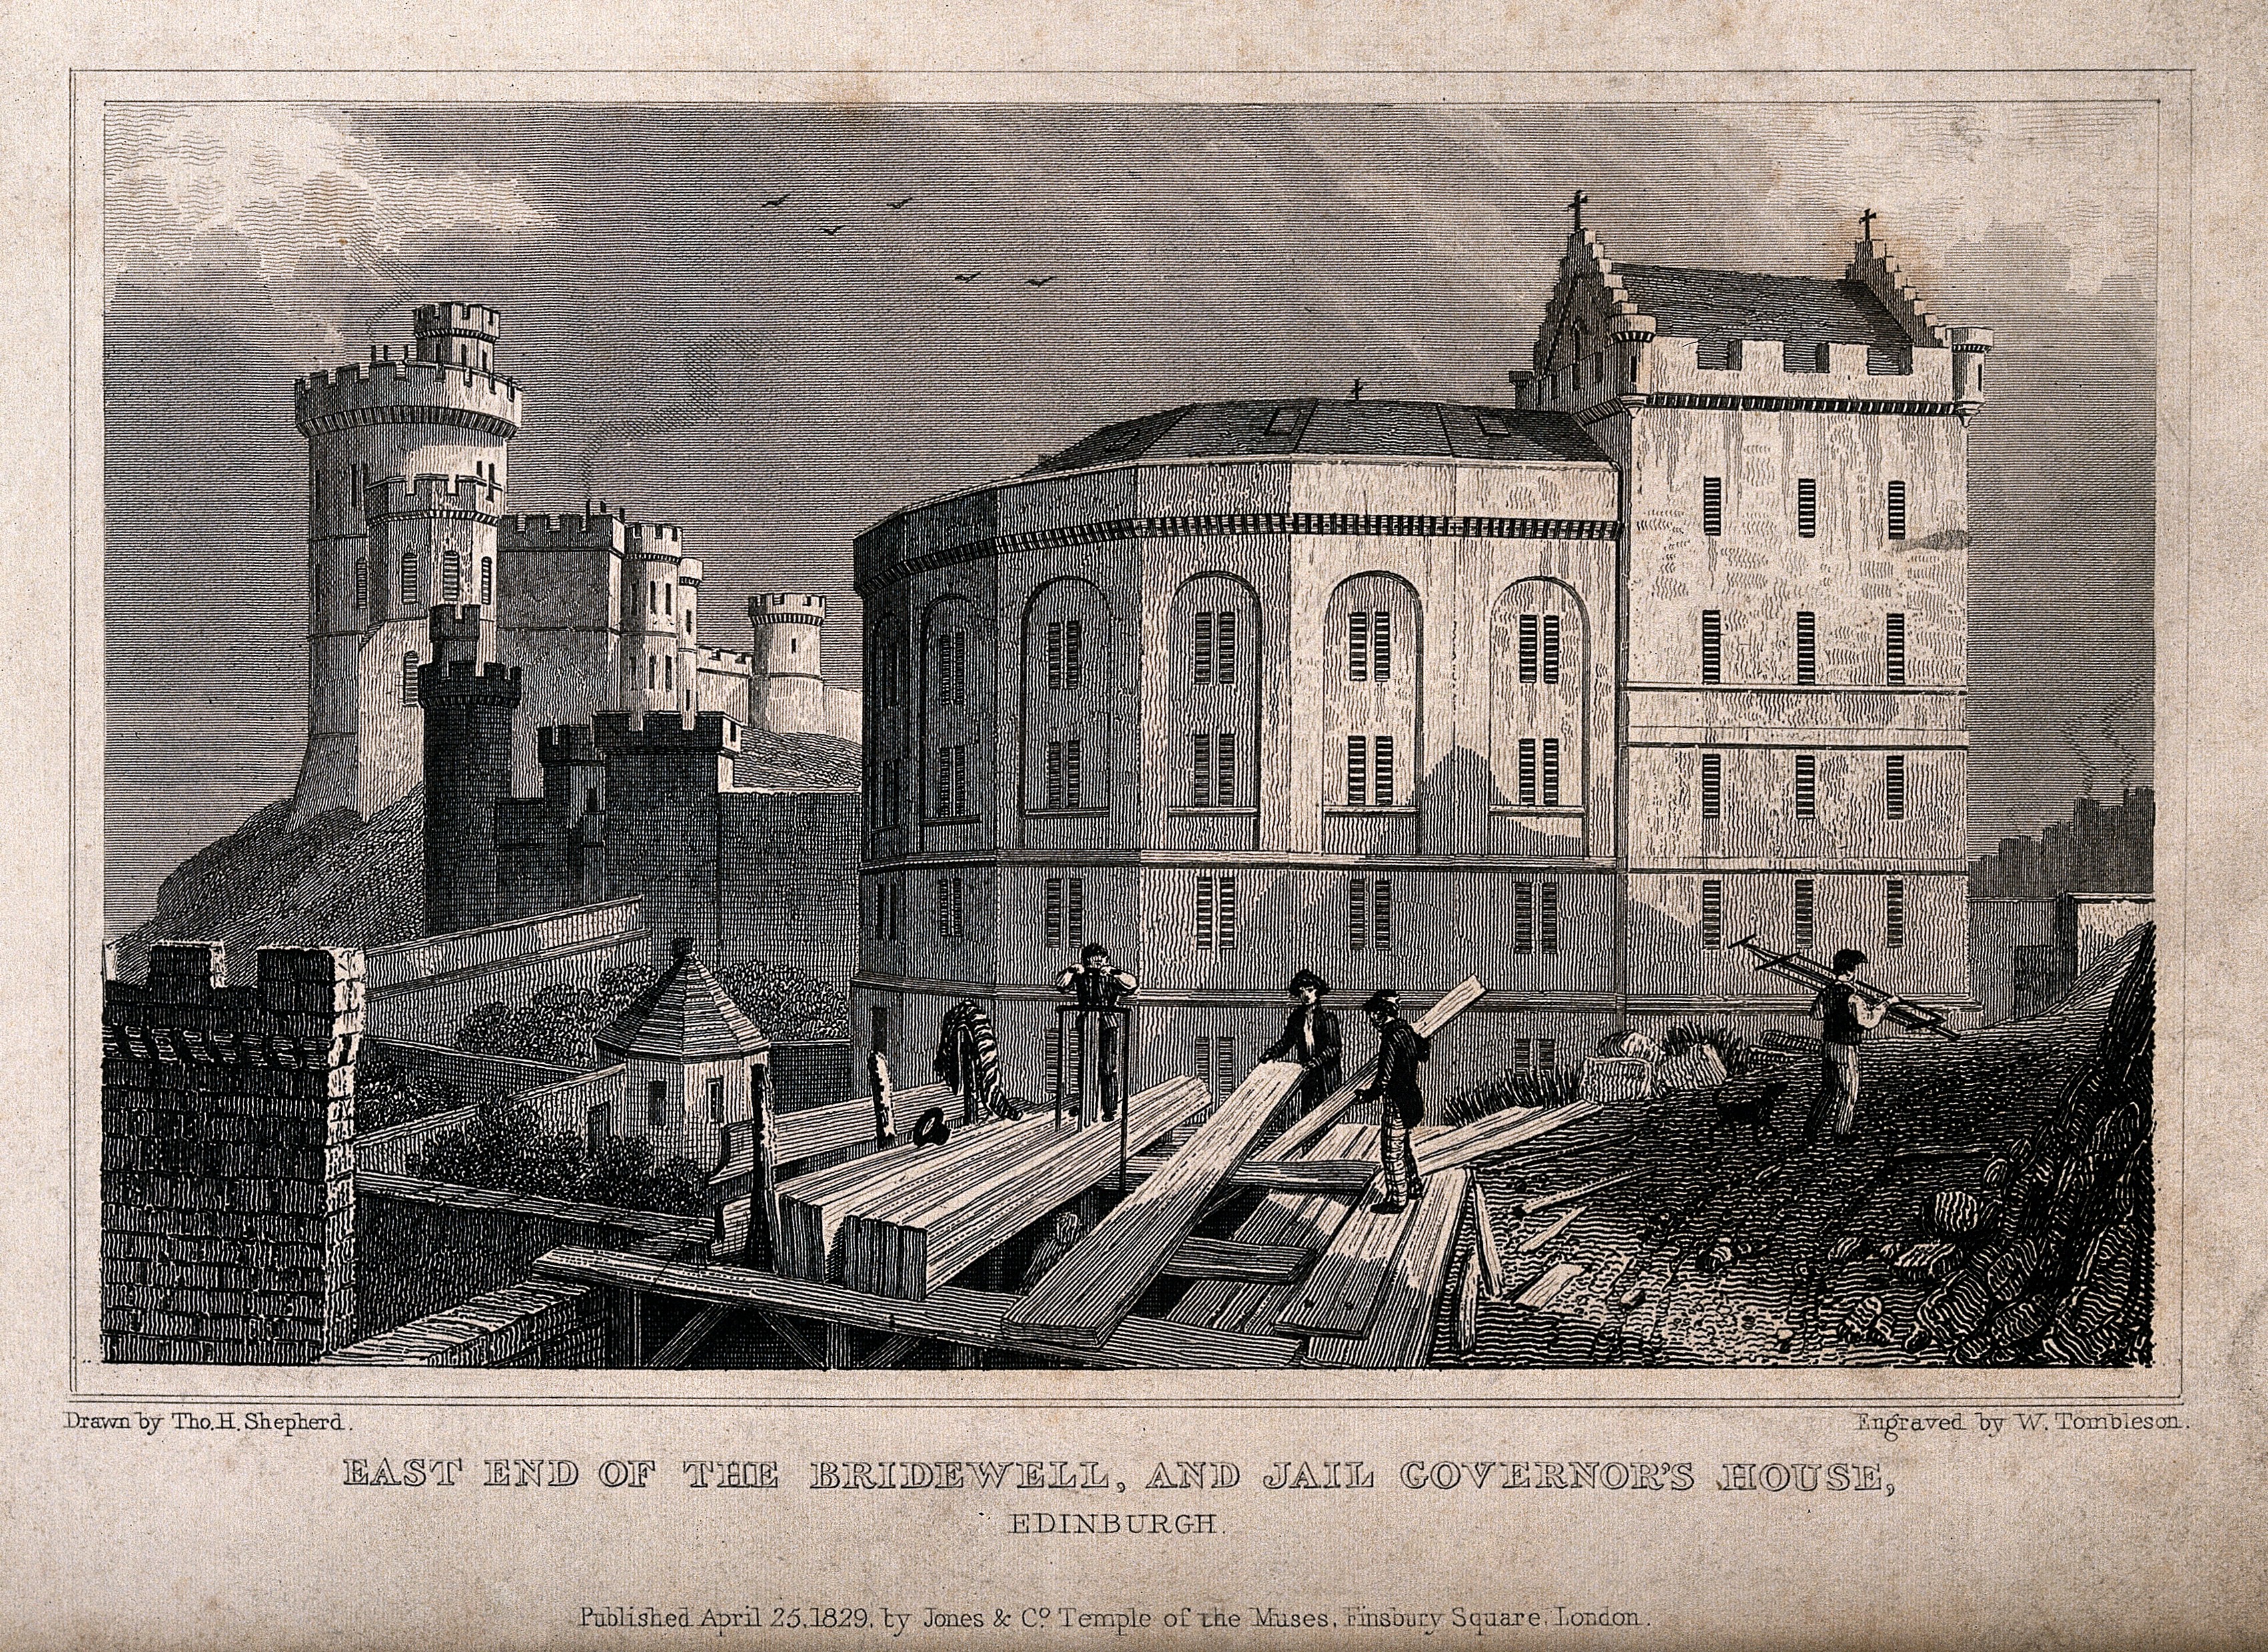 Figure 5 Construction work in front of Bridewell prison, Edinburgh, Scotland. Steel engraving by W. Tombles, 1829. Reproduced by permission of the Wellcome Library, London.